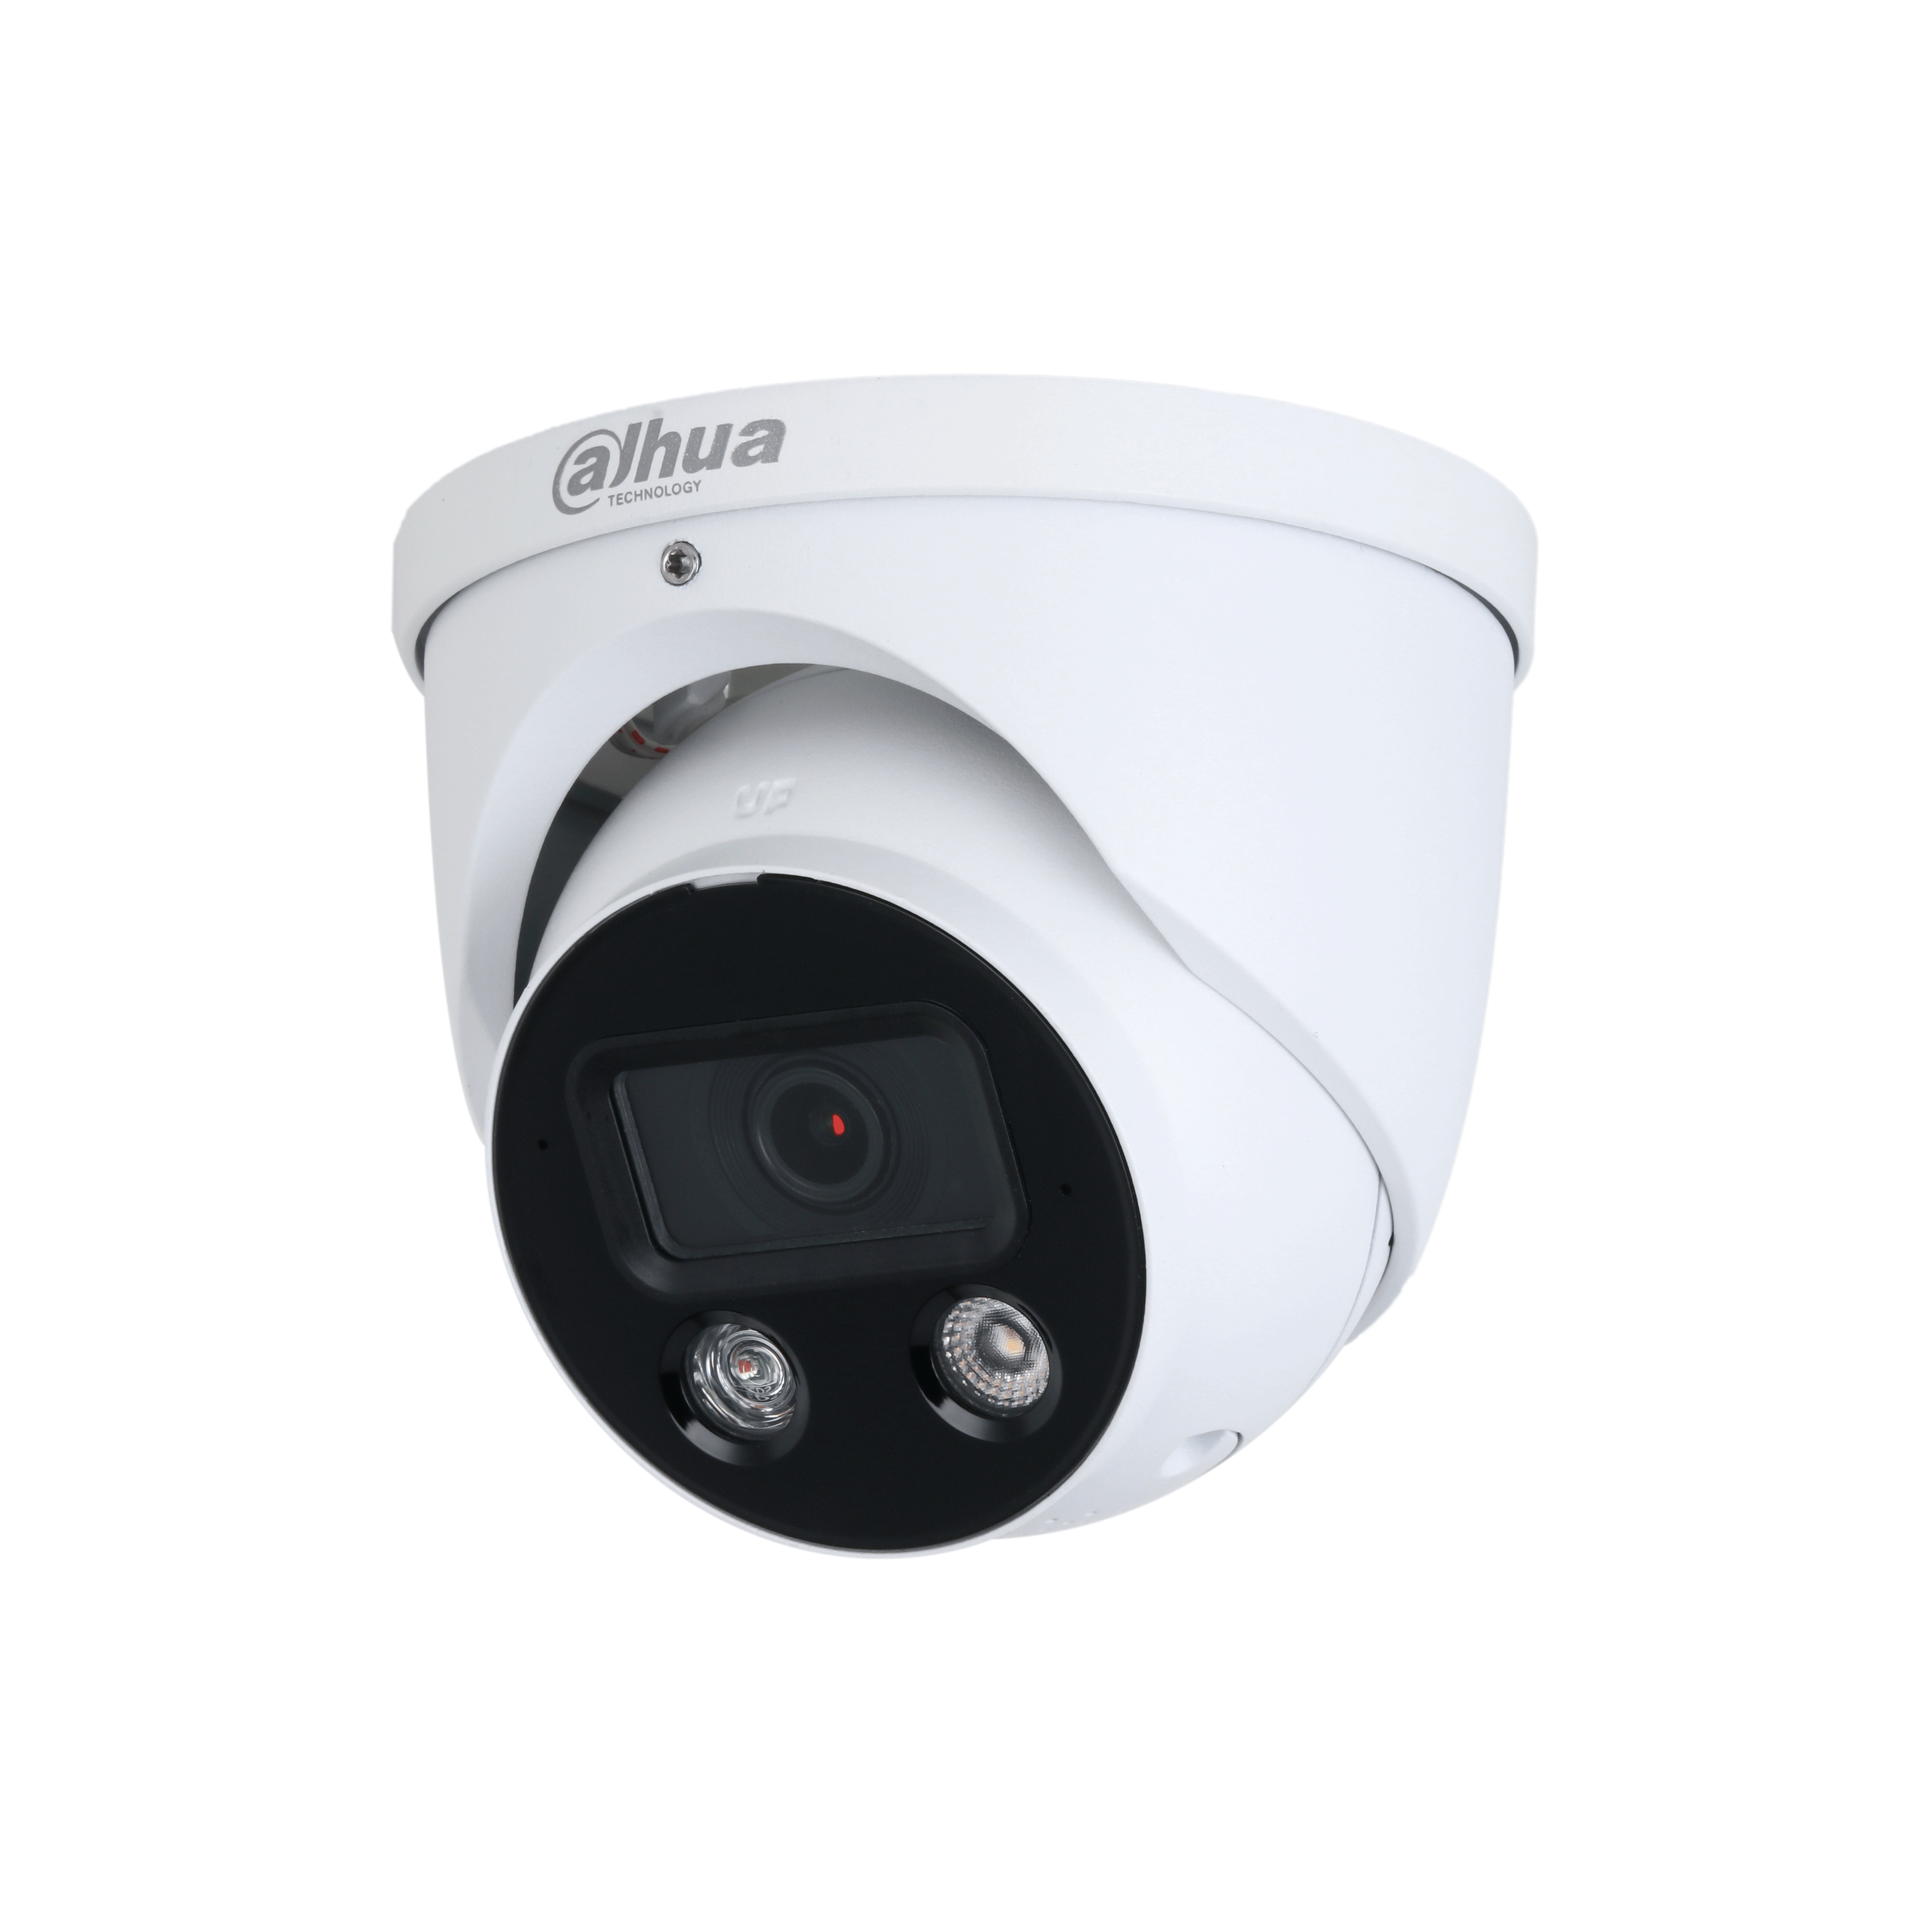 DH-IPC-HDW3649H-AS-PV-ANZ - Dahua - 6 MP Smart Dual Illumination Active Deterrence